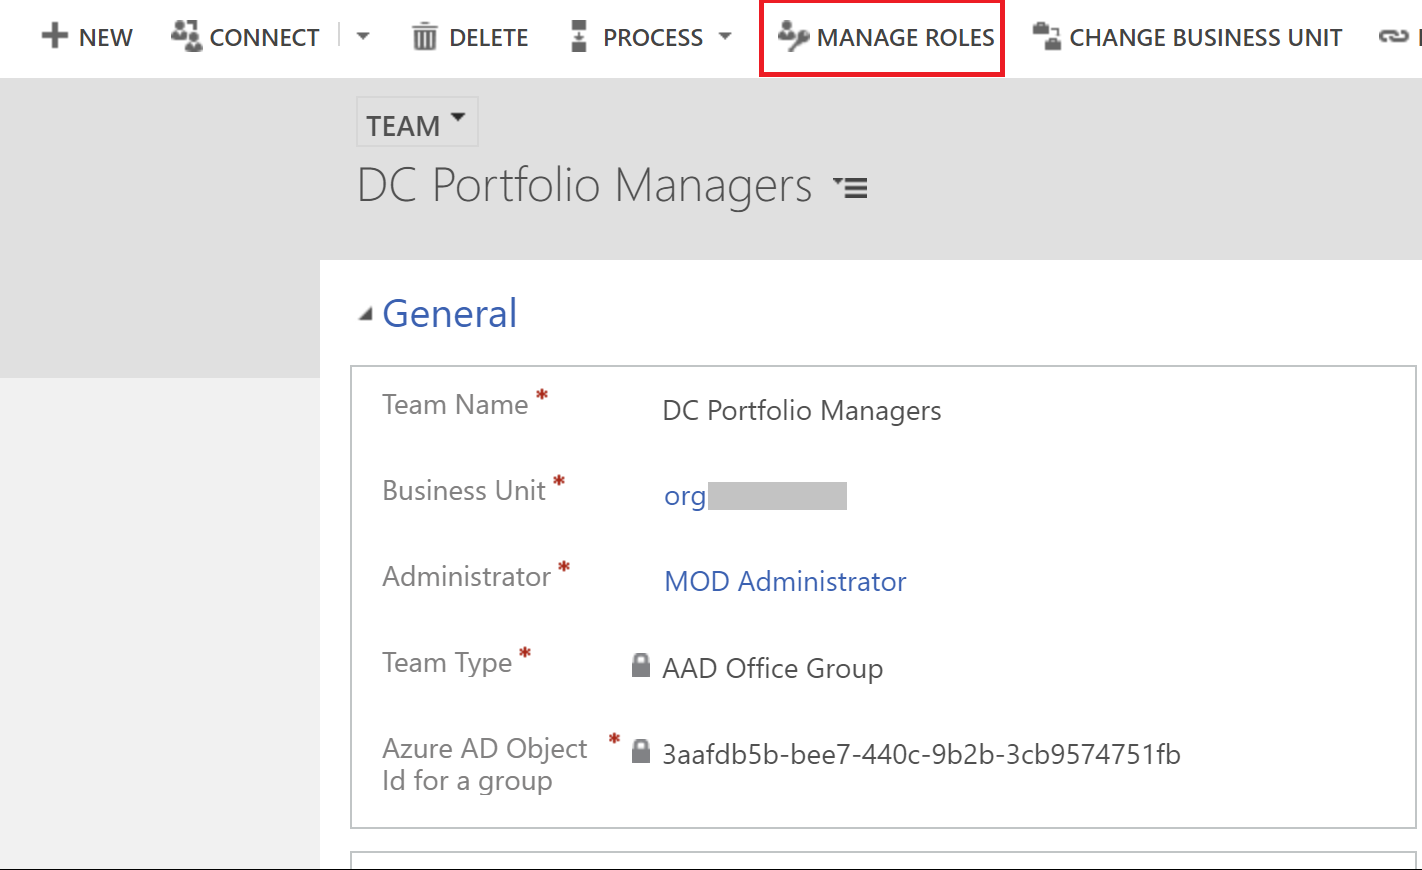 Image shows manage roles button in the ribbon